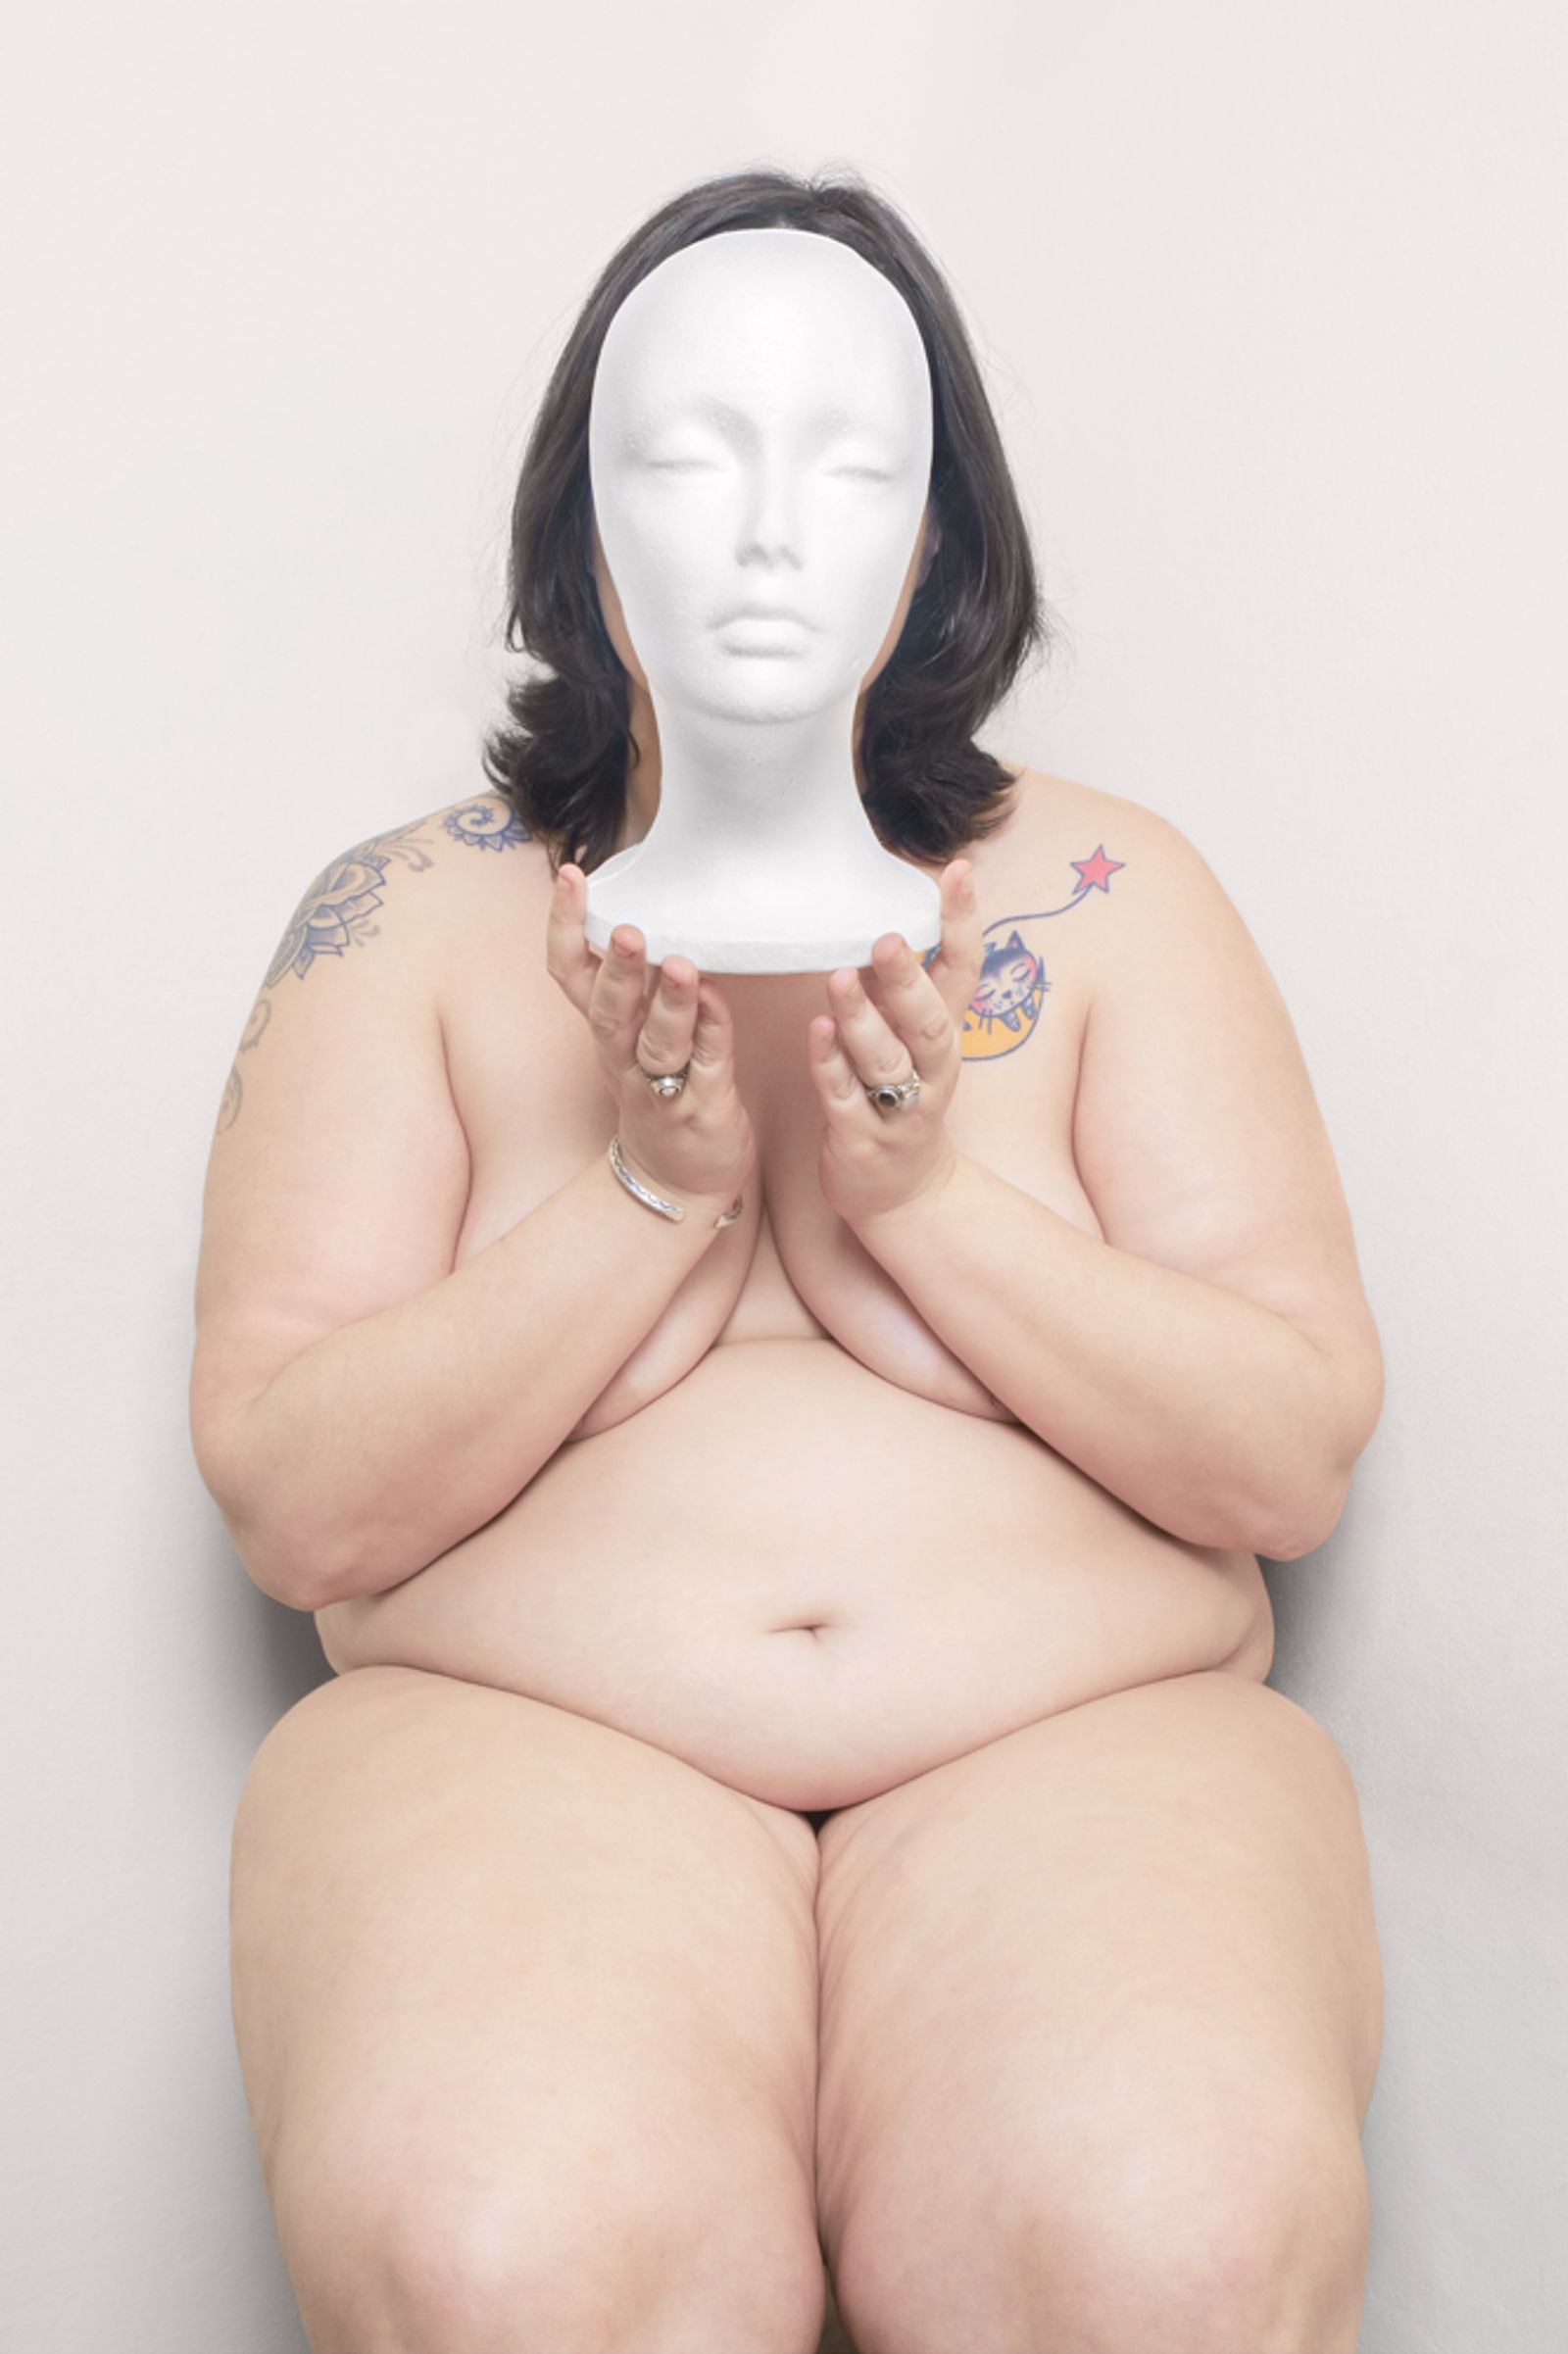 © Stefania Mattioli - Image from the Obesa photography project